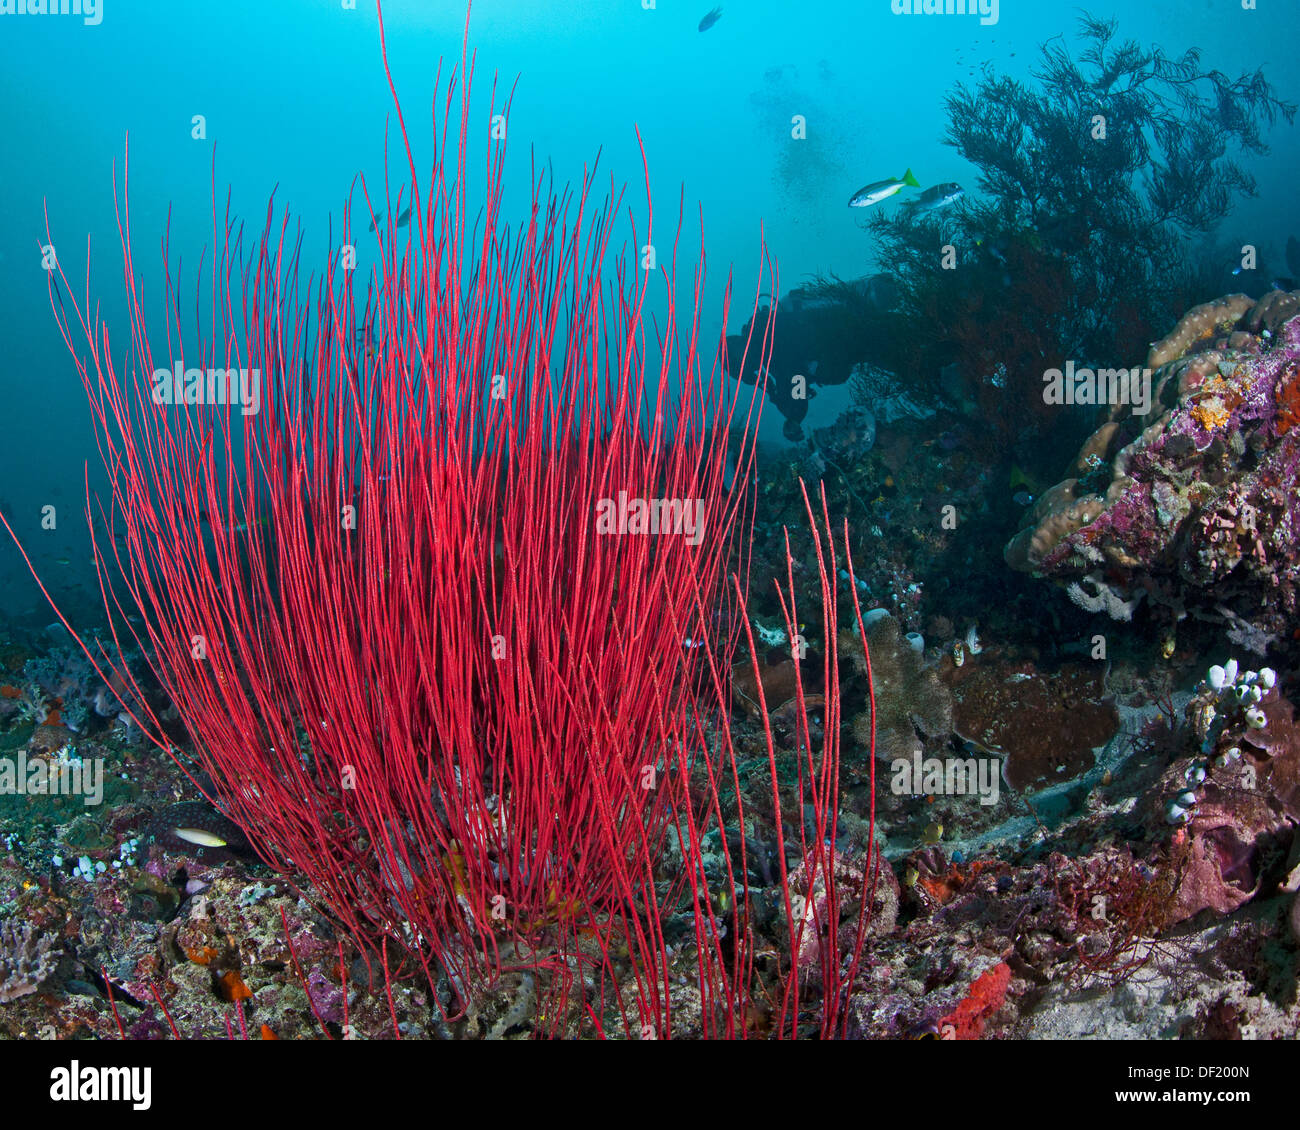 Seascape featuring red gorgonian sea whips with seafan, reef fish and blue water background in Raja Ampat, Indonesia. Stock Photo